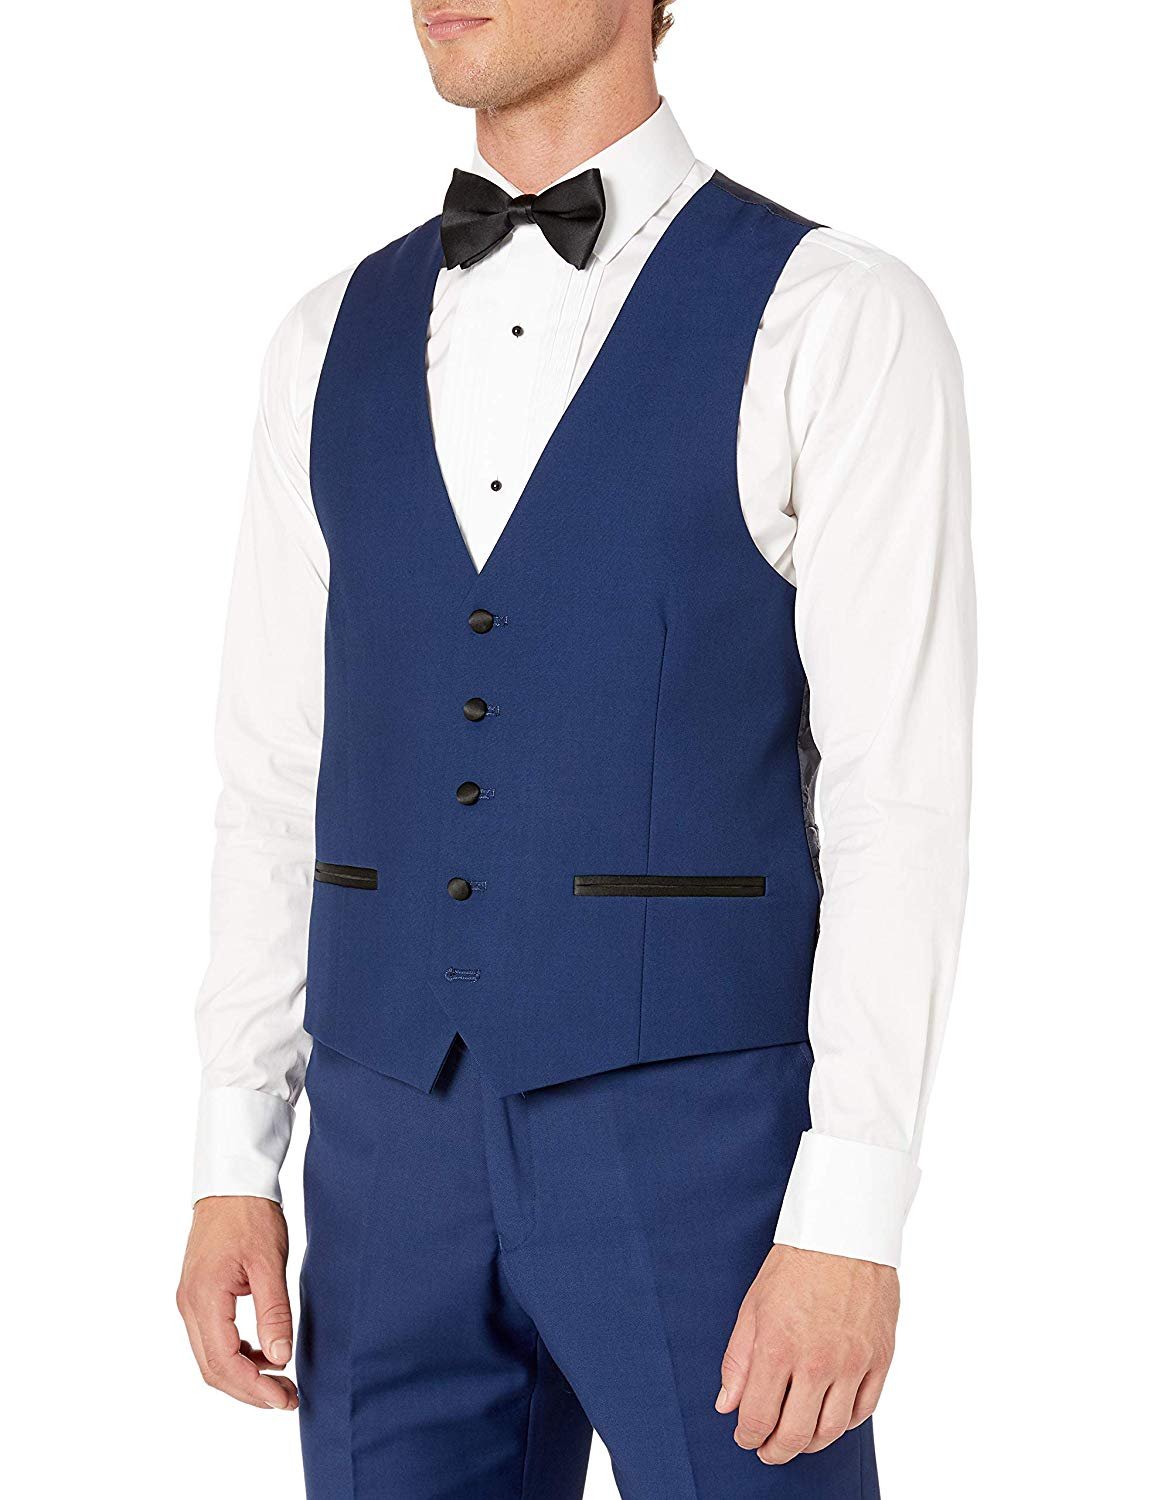 Adam Baker by Statement Men's Single Breasted Three Piece Shawl Collar Tuxedo - Sapphire Contrast - 56R - image 1 of 6